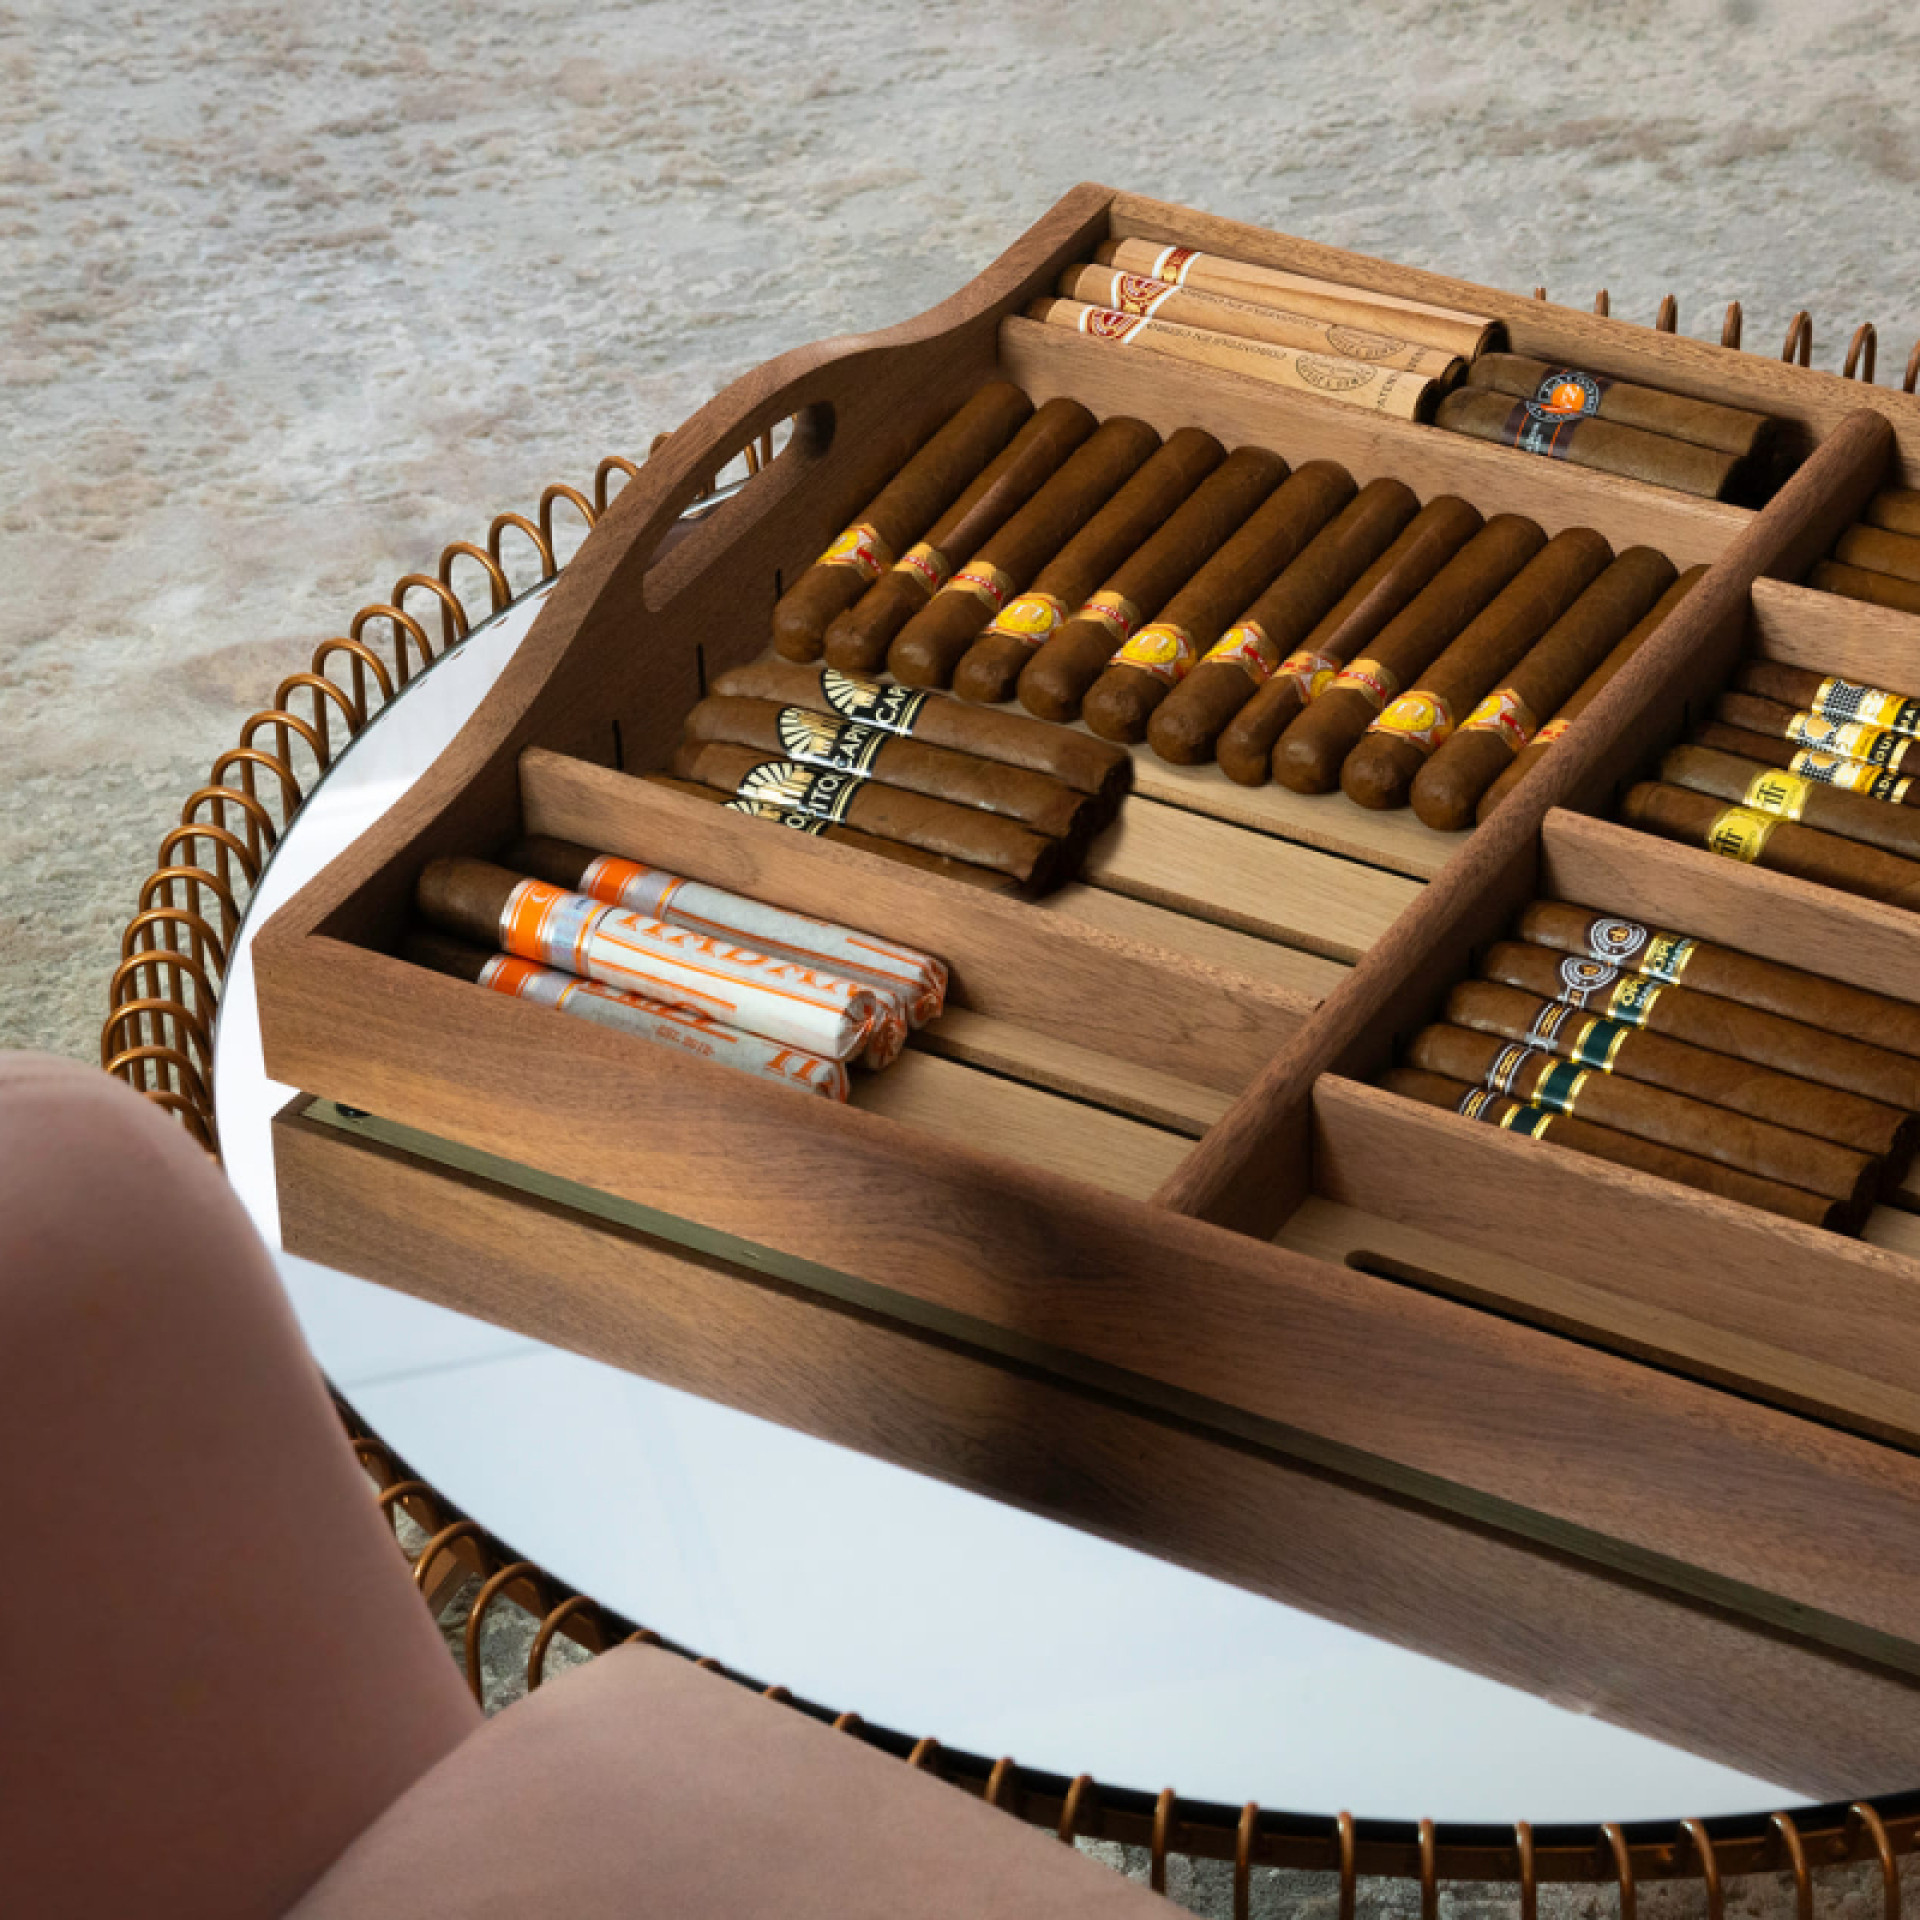 Sliding shelf and removable cigar serving tray. A beautiful presentation of cigars to share with your guests.